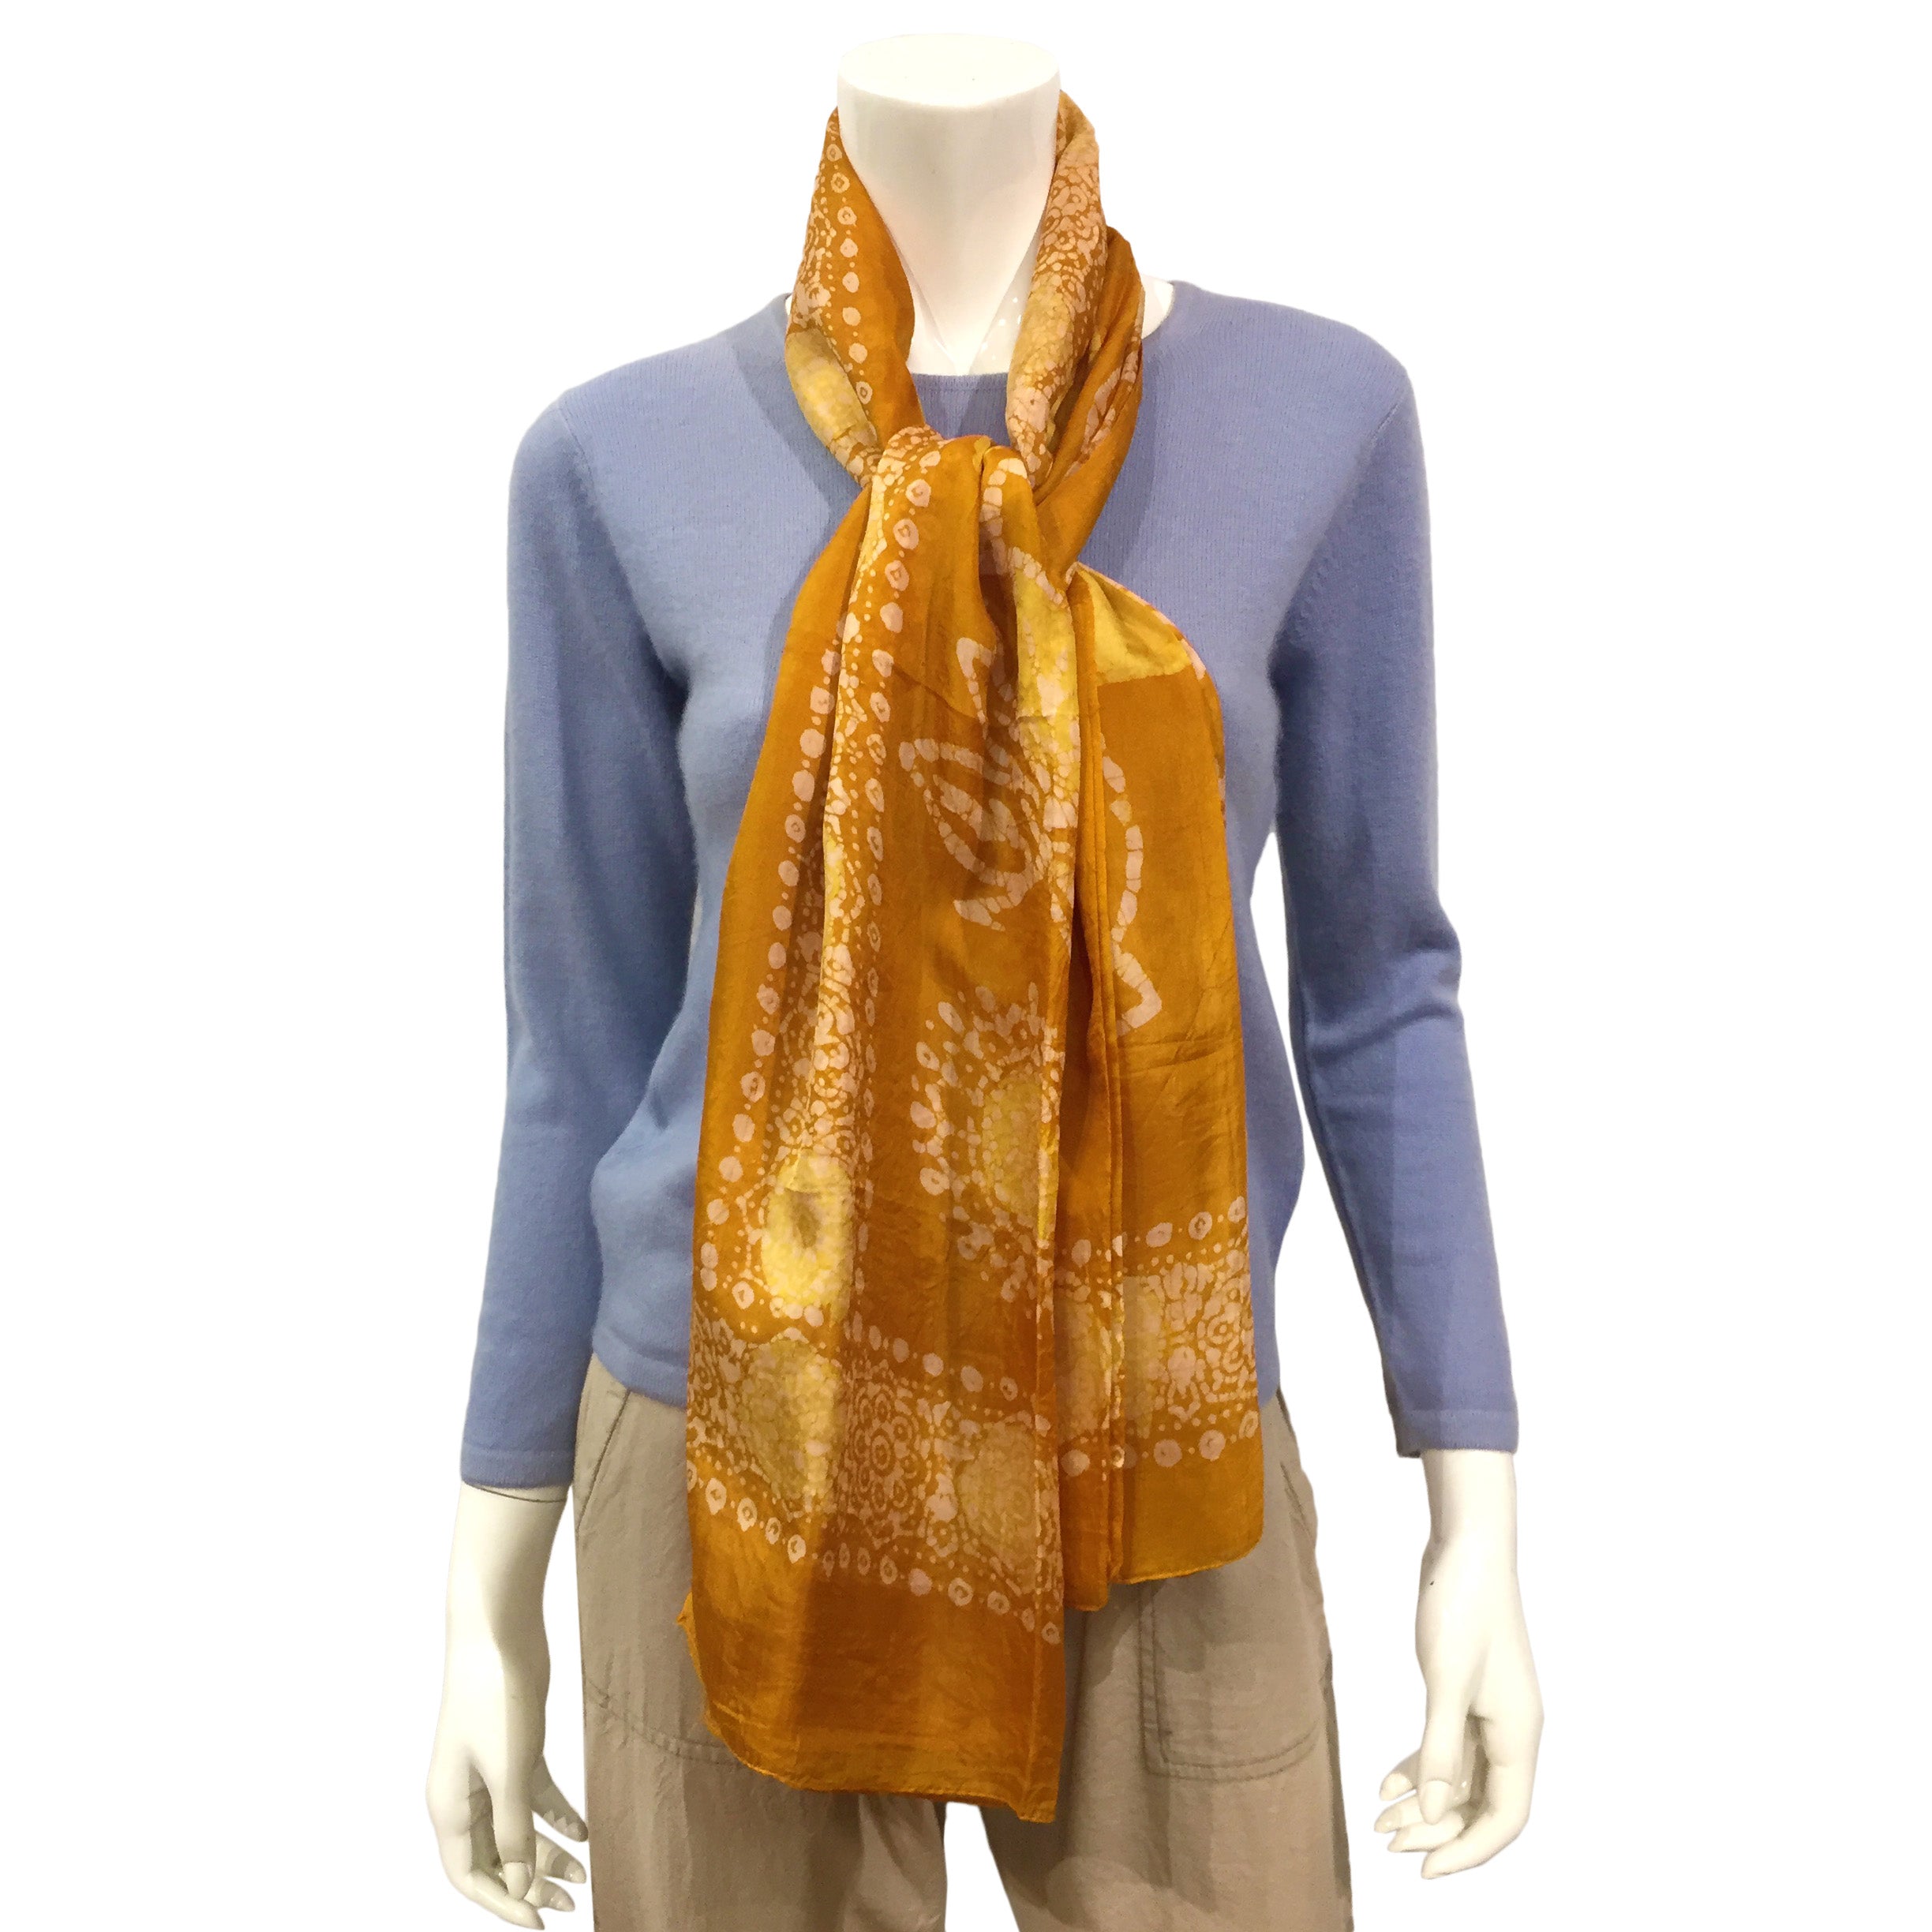 Silk Scarf with pattern